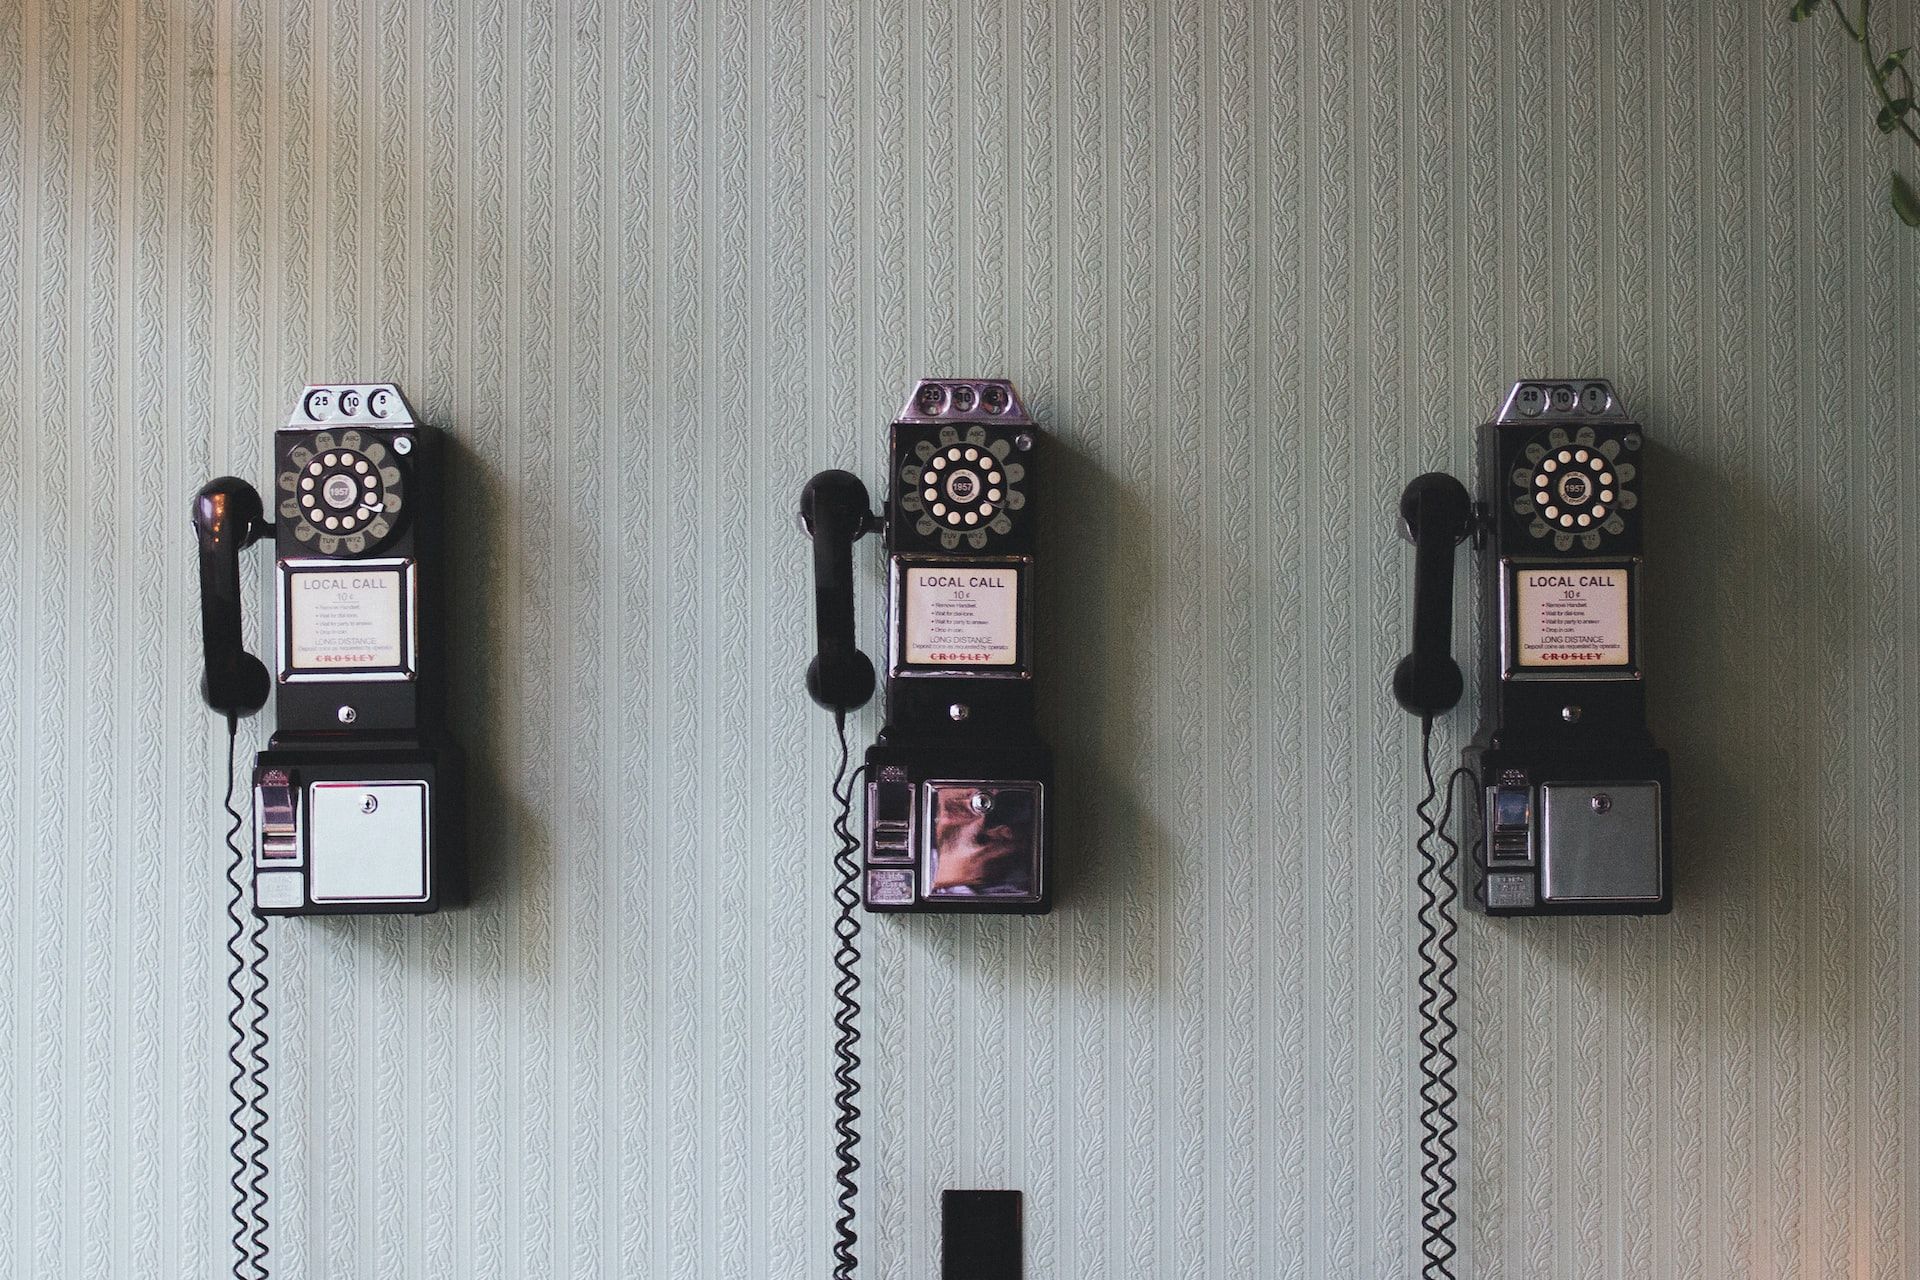 3 old fashioned wall mounted phones